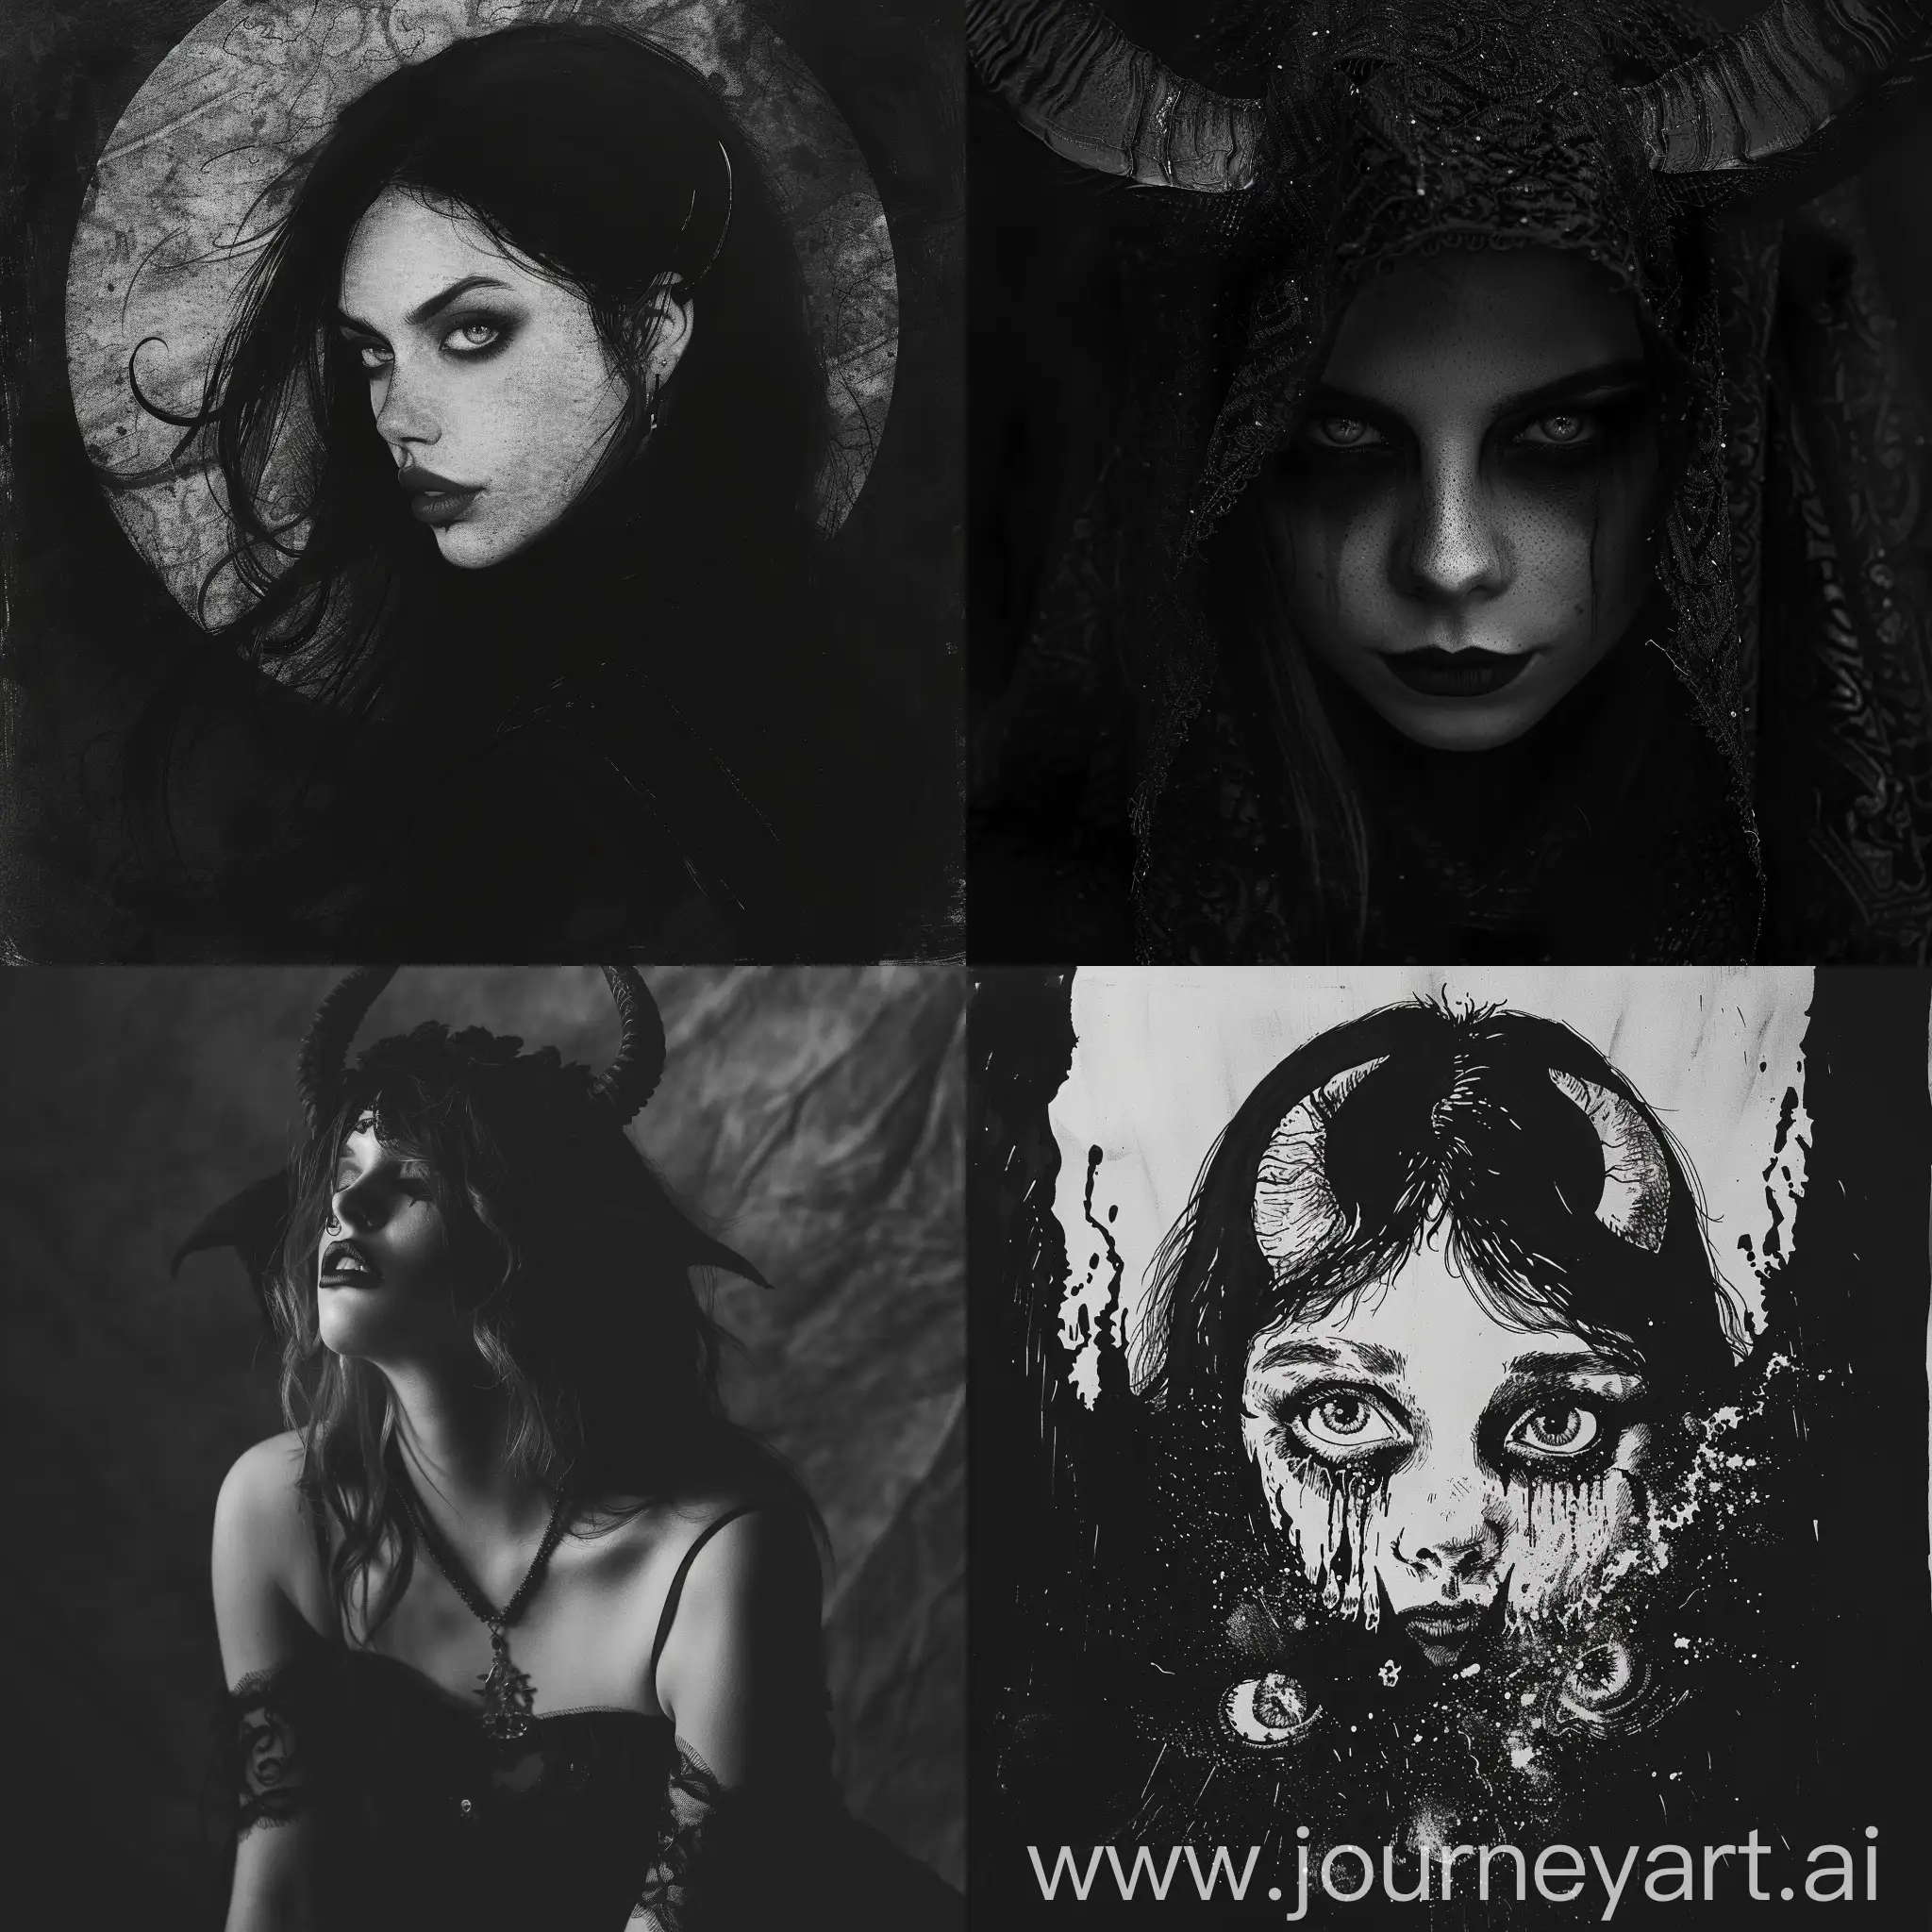 Mysterious-Black-and-White-Portrait-of-a-Creepy-Girl-Embracing-Darkness